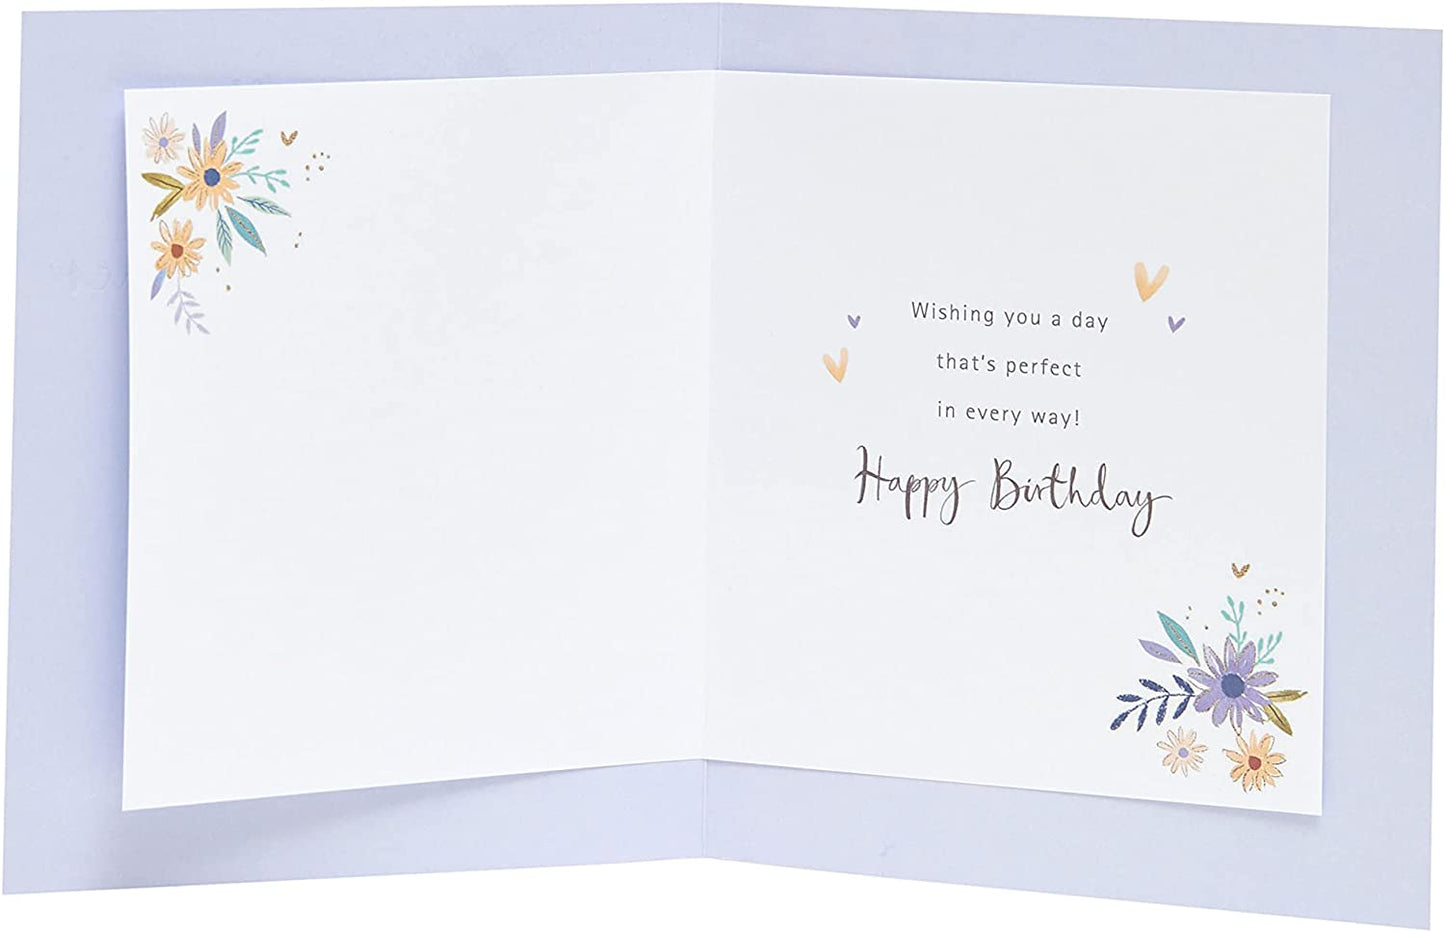 Lovely Design With Cake Sparklers Godmother Birthday Card